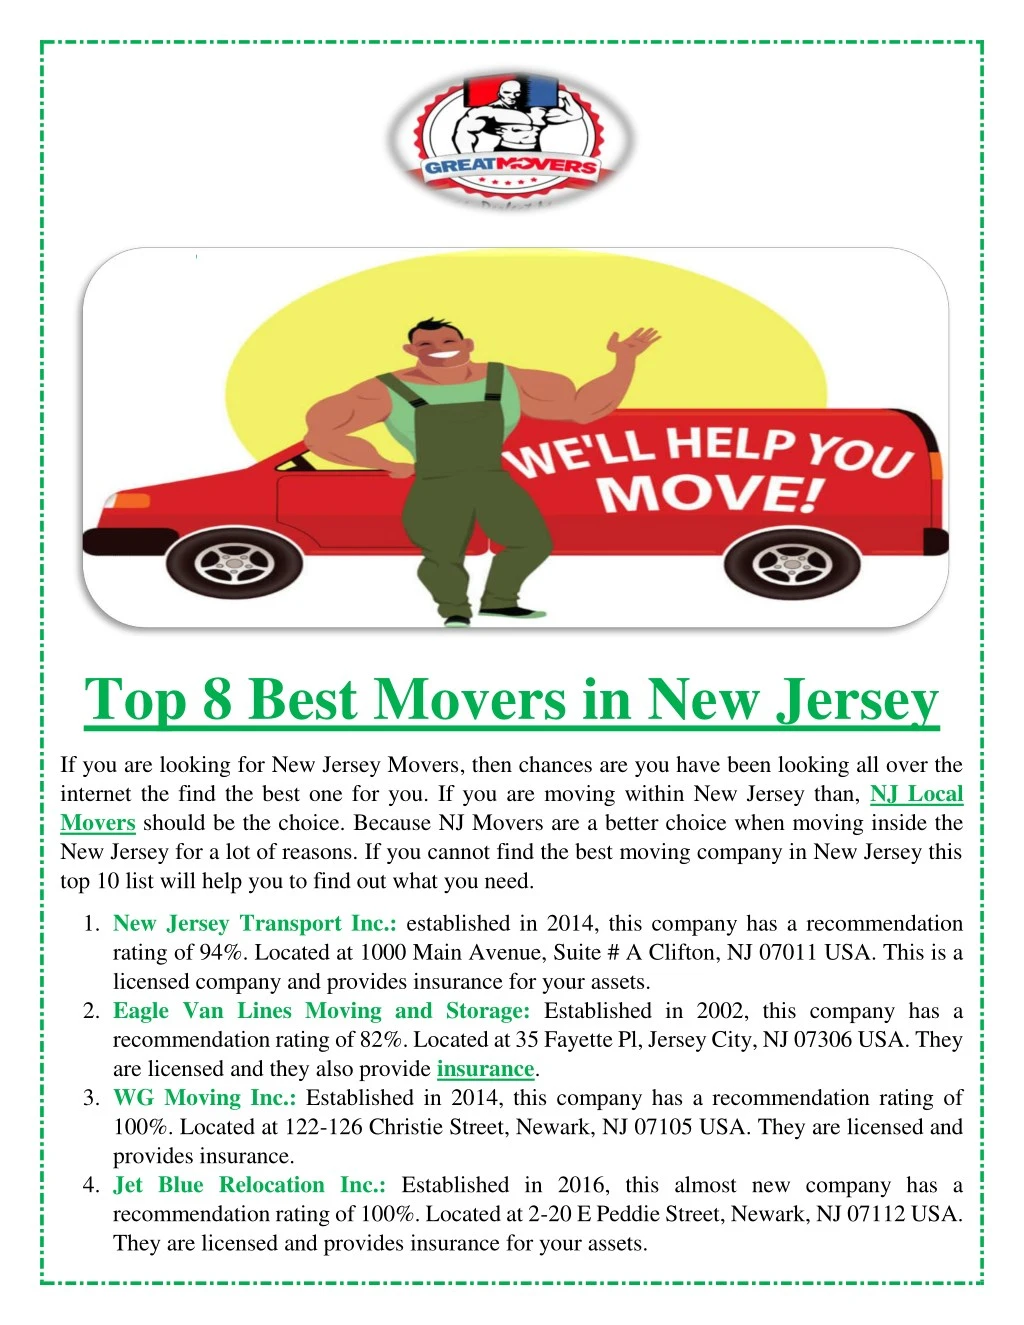 top 8 best movers in new jersey